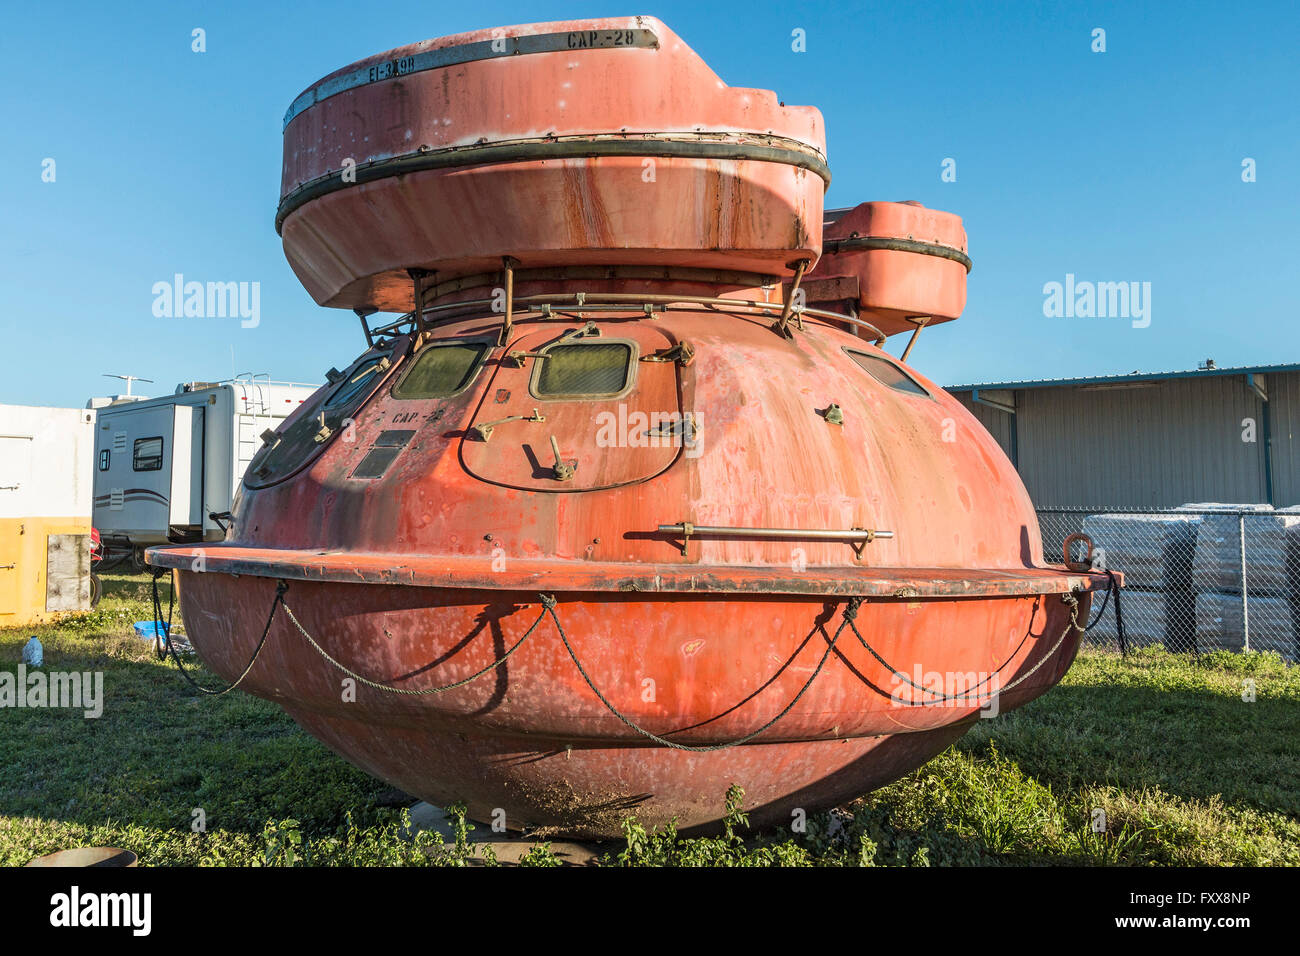 Metal lifeboat capsule used by the offshore drilling industry. Stock Photo